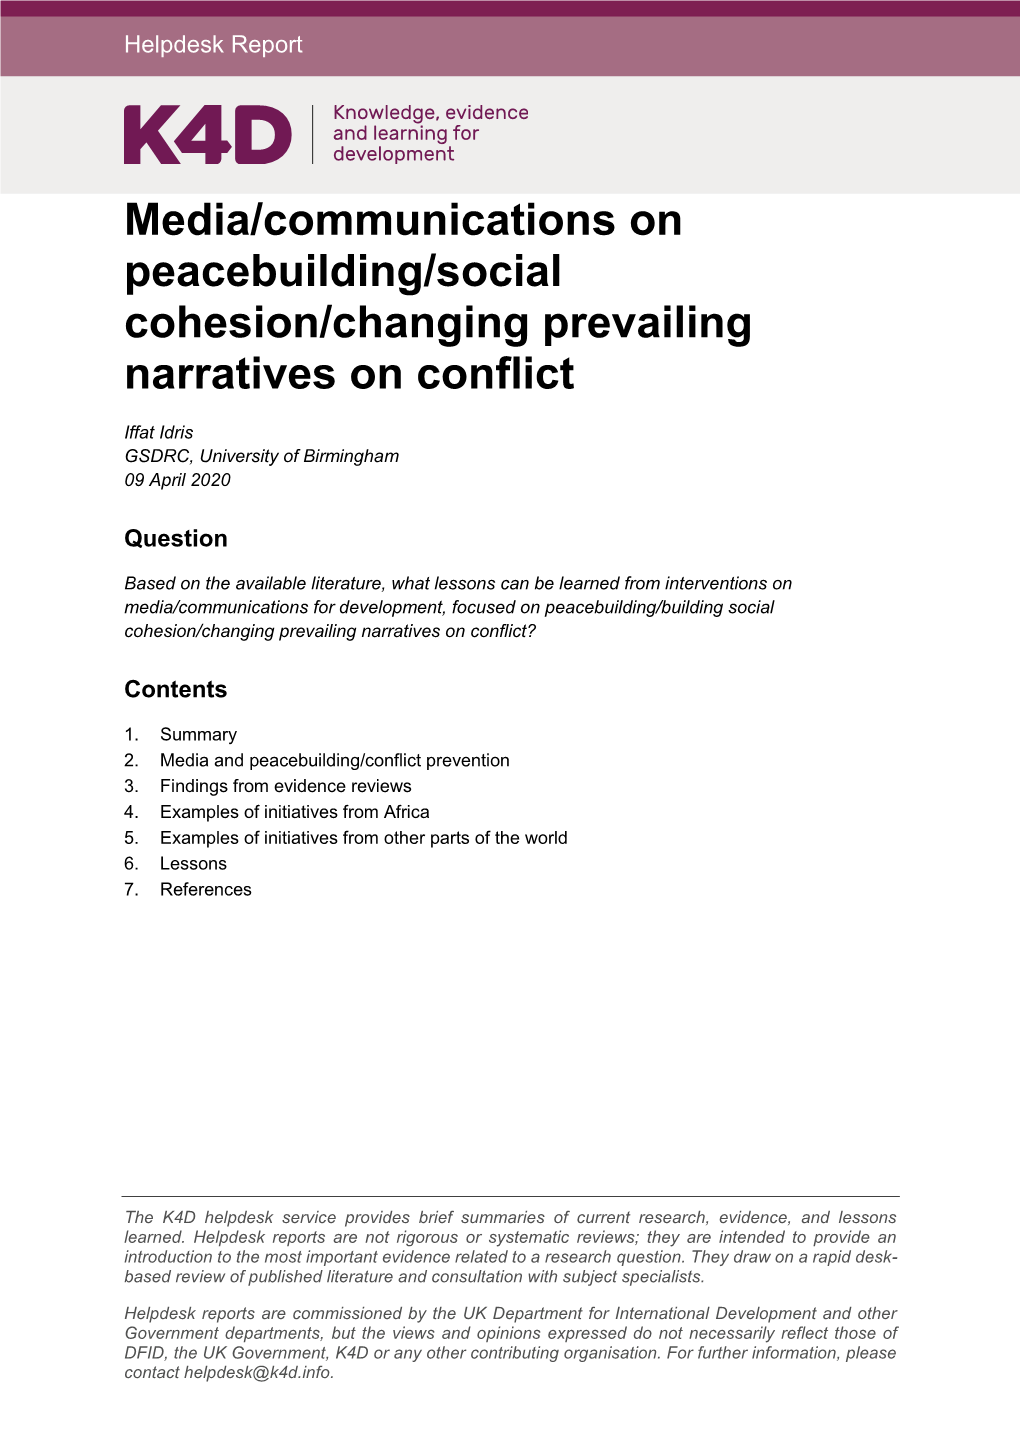 Media/Communications on Peacebuilding/Social Cohesion/Changing Prevailing Narratives on Conflict